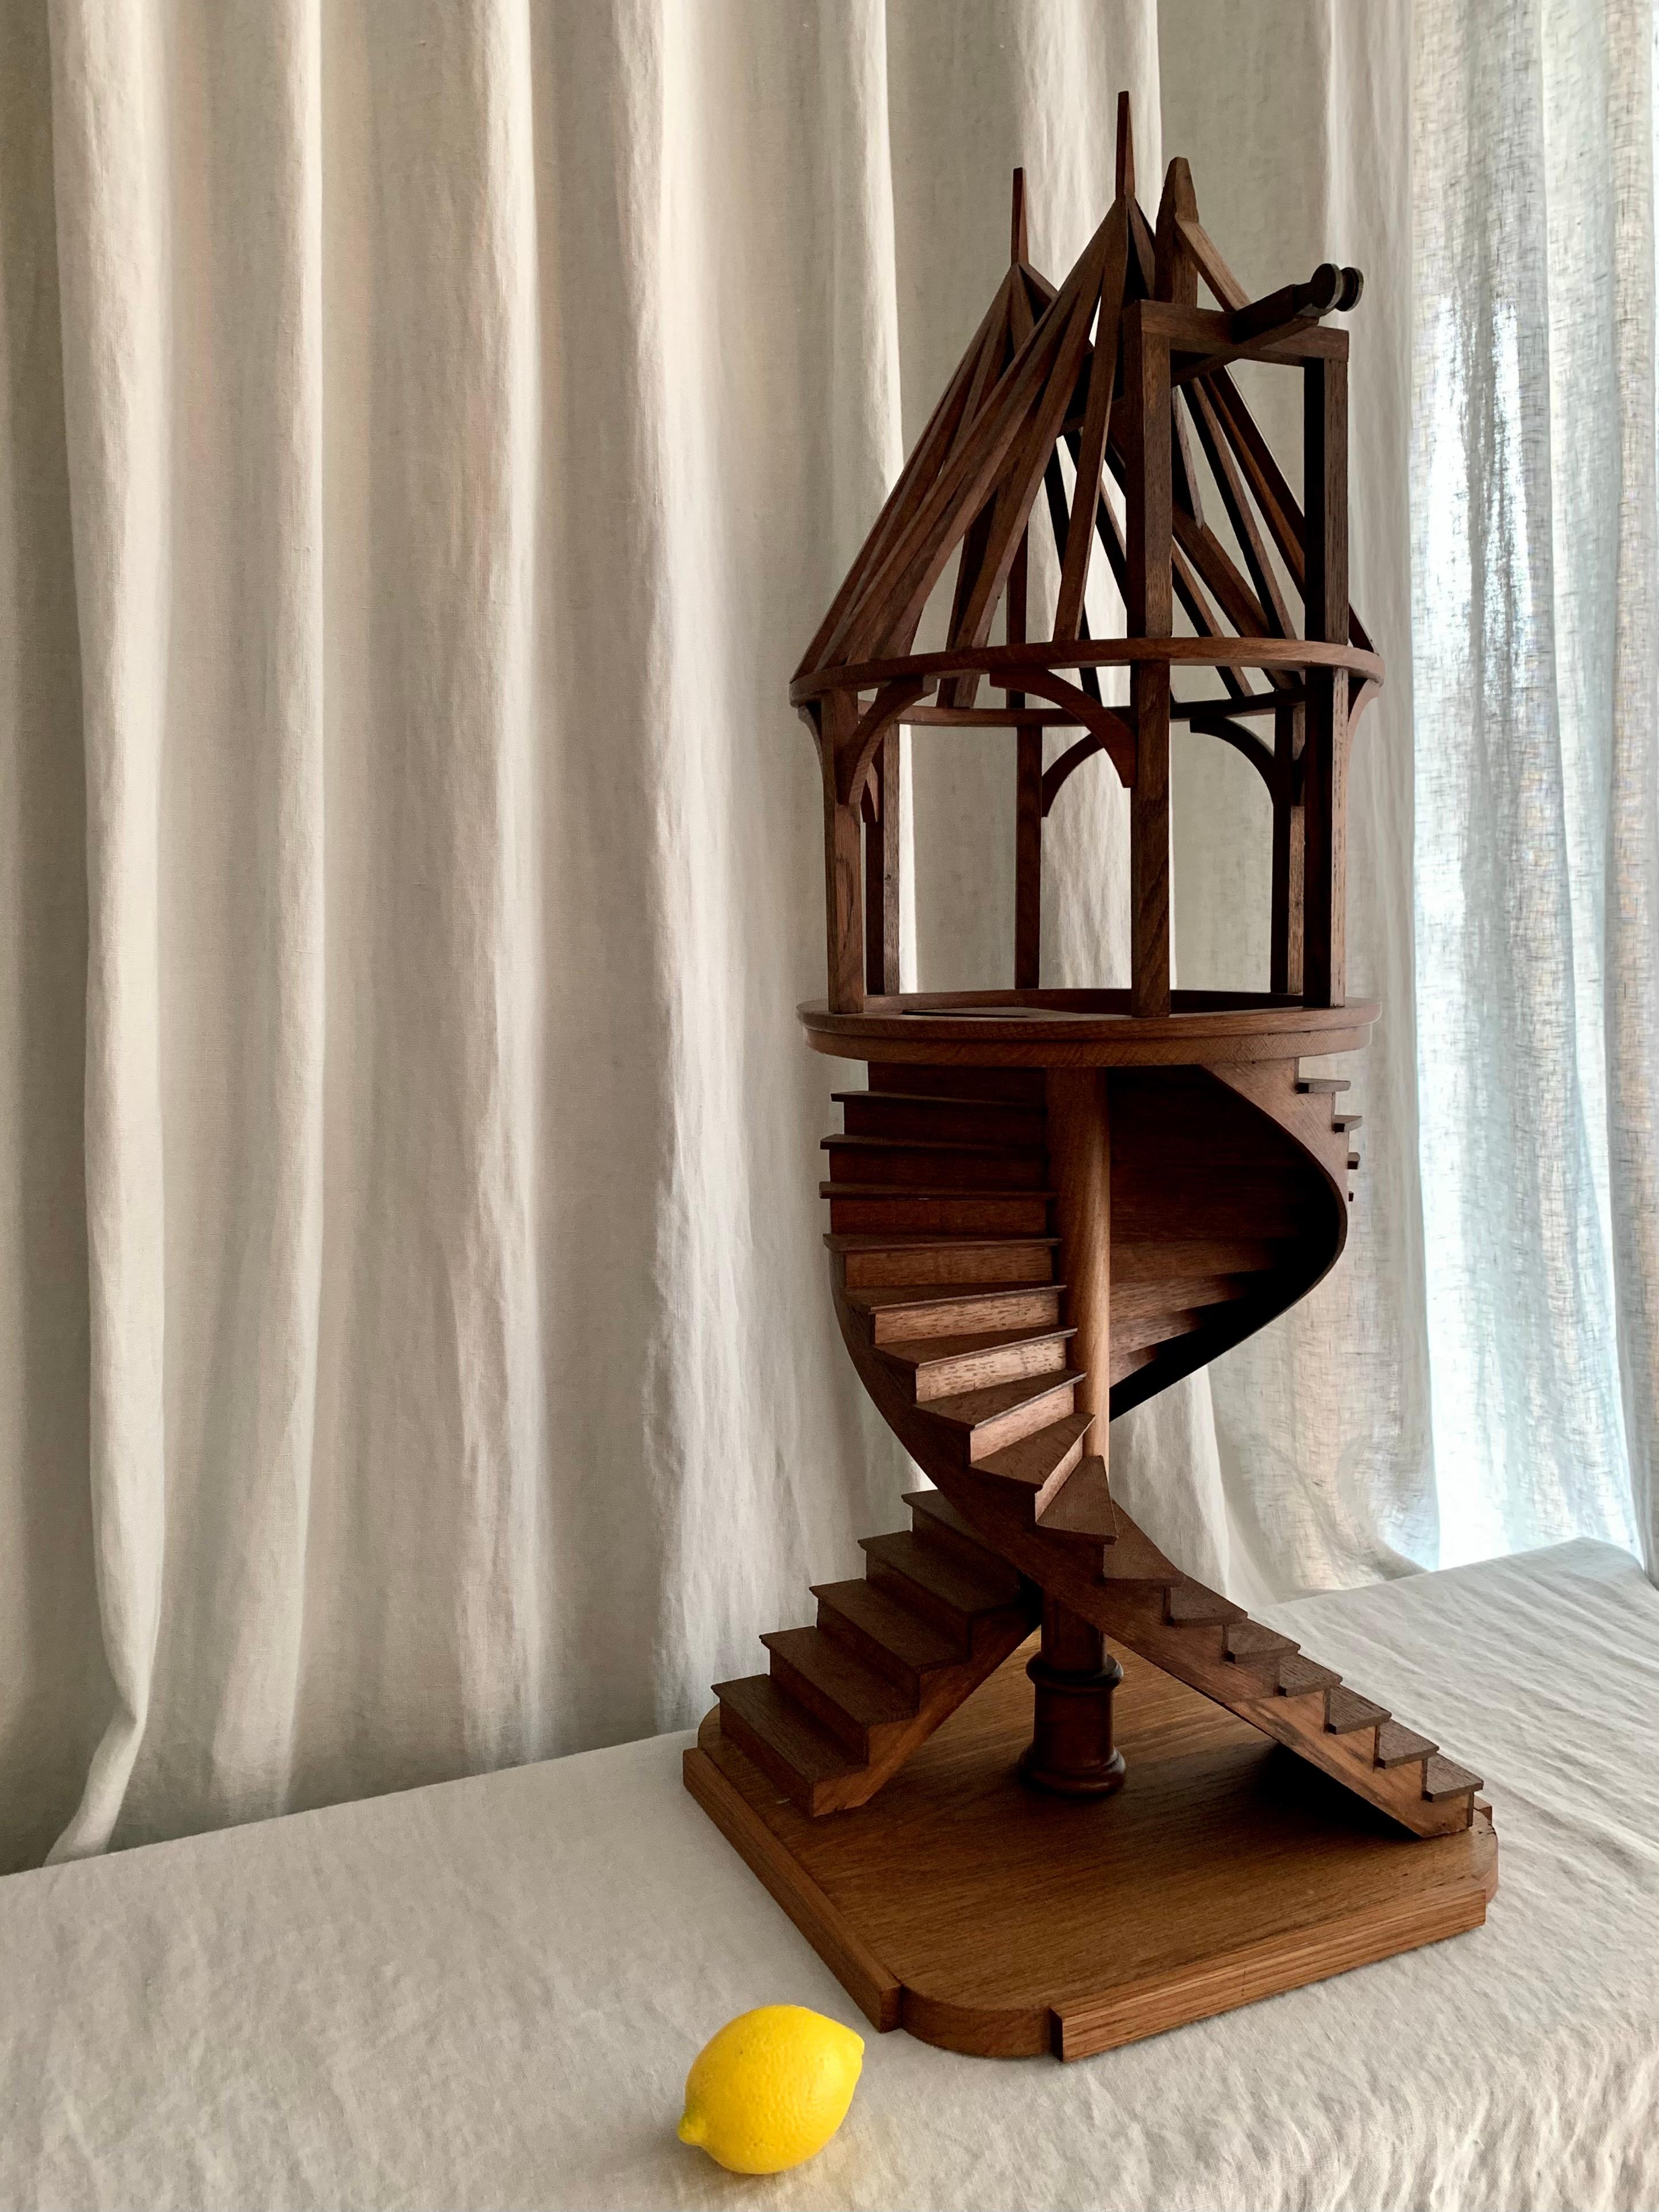 Antique French hand made wood scale model of a stair case and tower construction. A genuine proof of skilled craftsmanship and a rare and very decorative item.